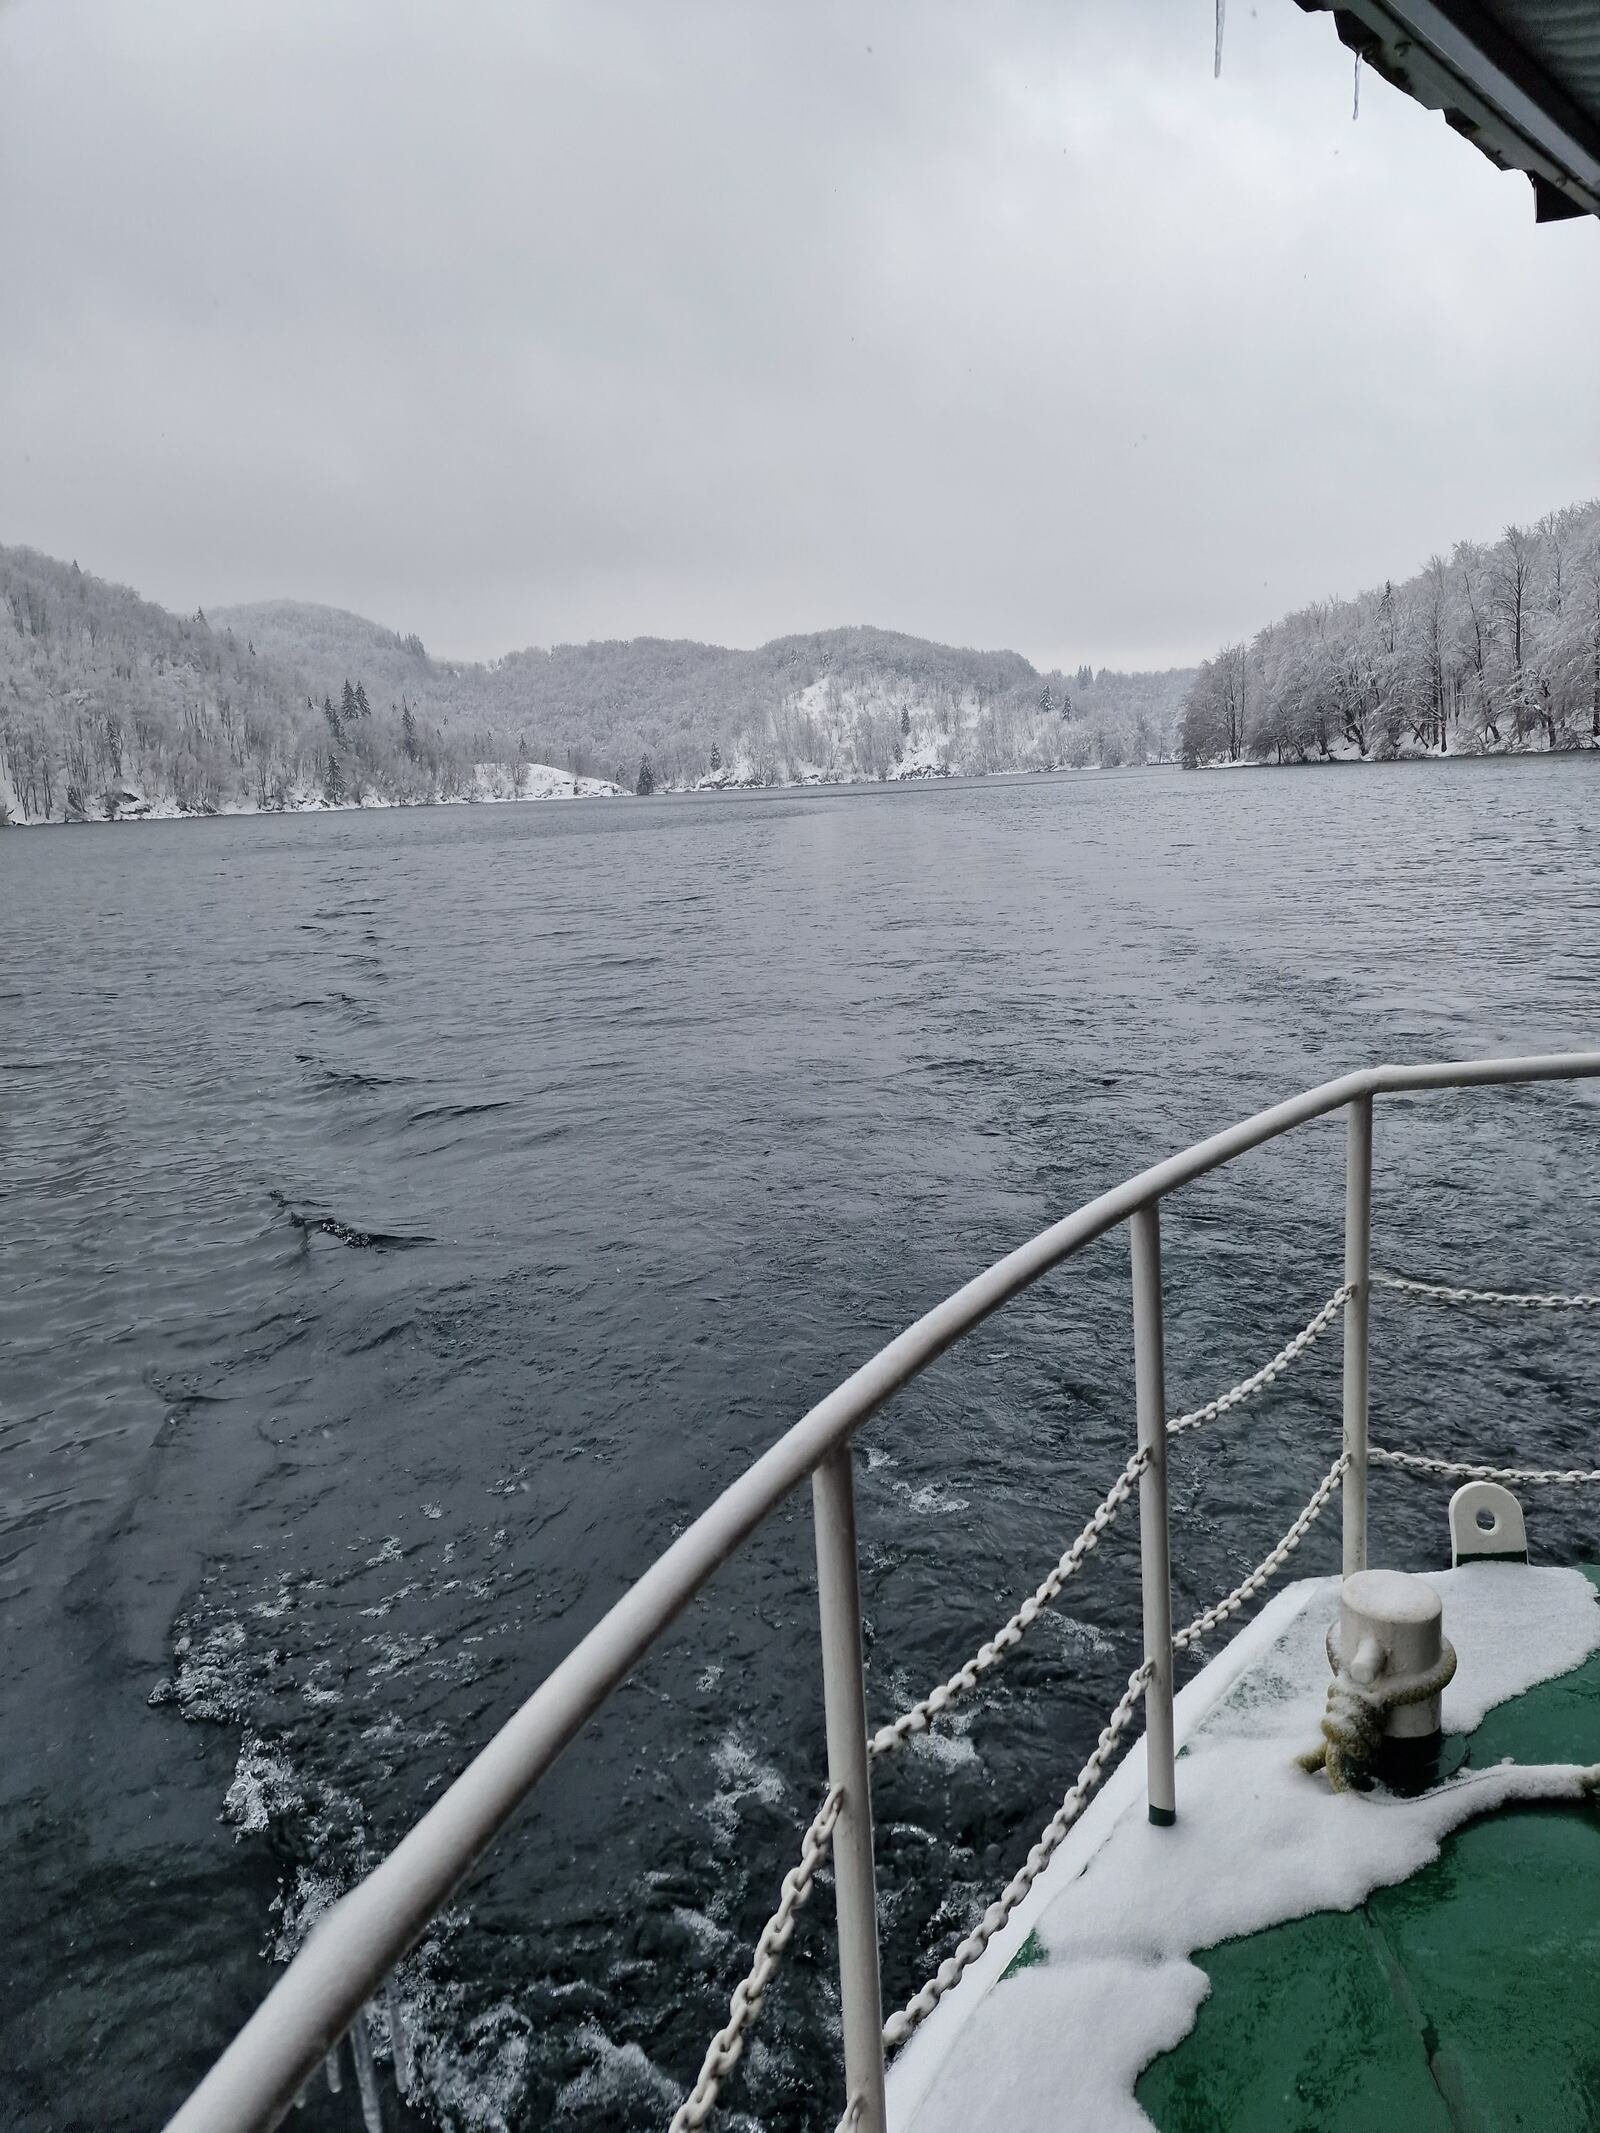 Looking out off the back of a boat with metal railings across a large lake with dark water and snow covered hills and trees along the edge of the lake